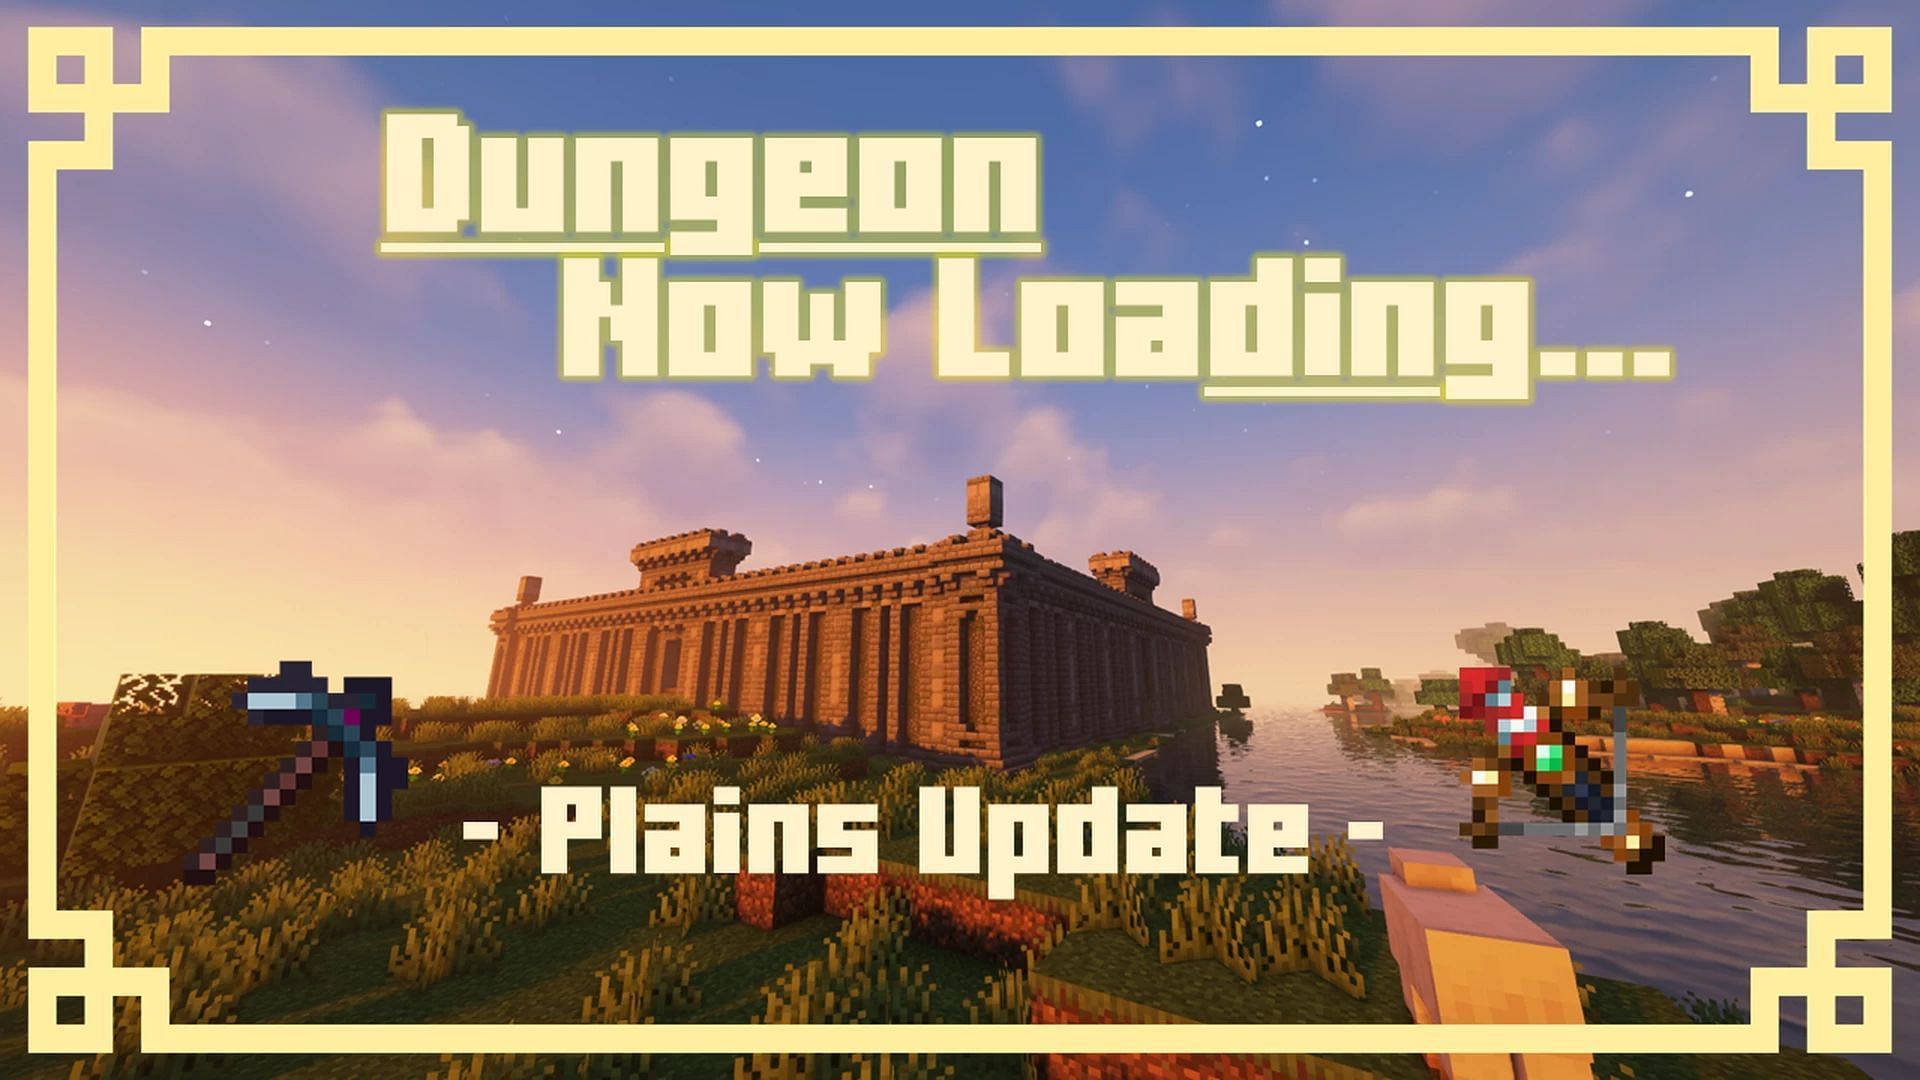 The title image for Dungeon Now Loading (Image via planetminecraft.com)